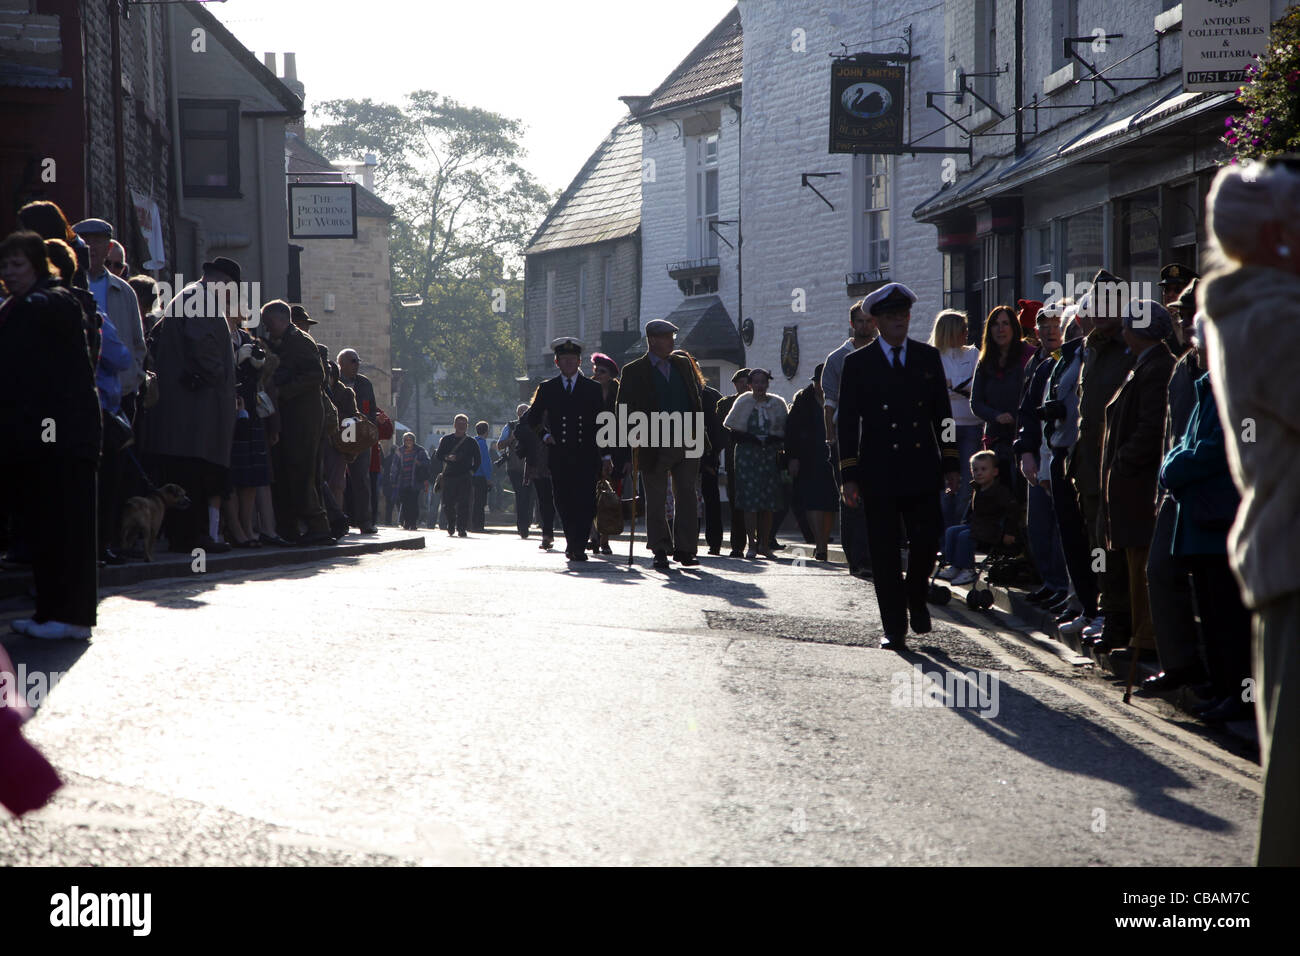 REENACTING 1940S OFFICERS ON STREET PICKERING NORTH YORKSHIRE 15 October 2011 Stock Photo